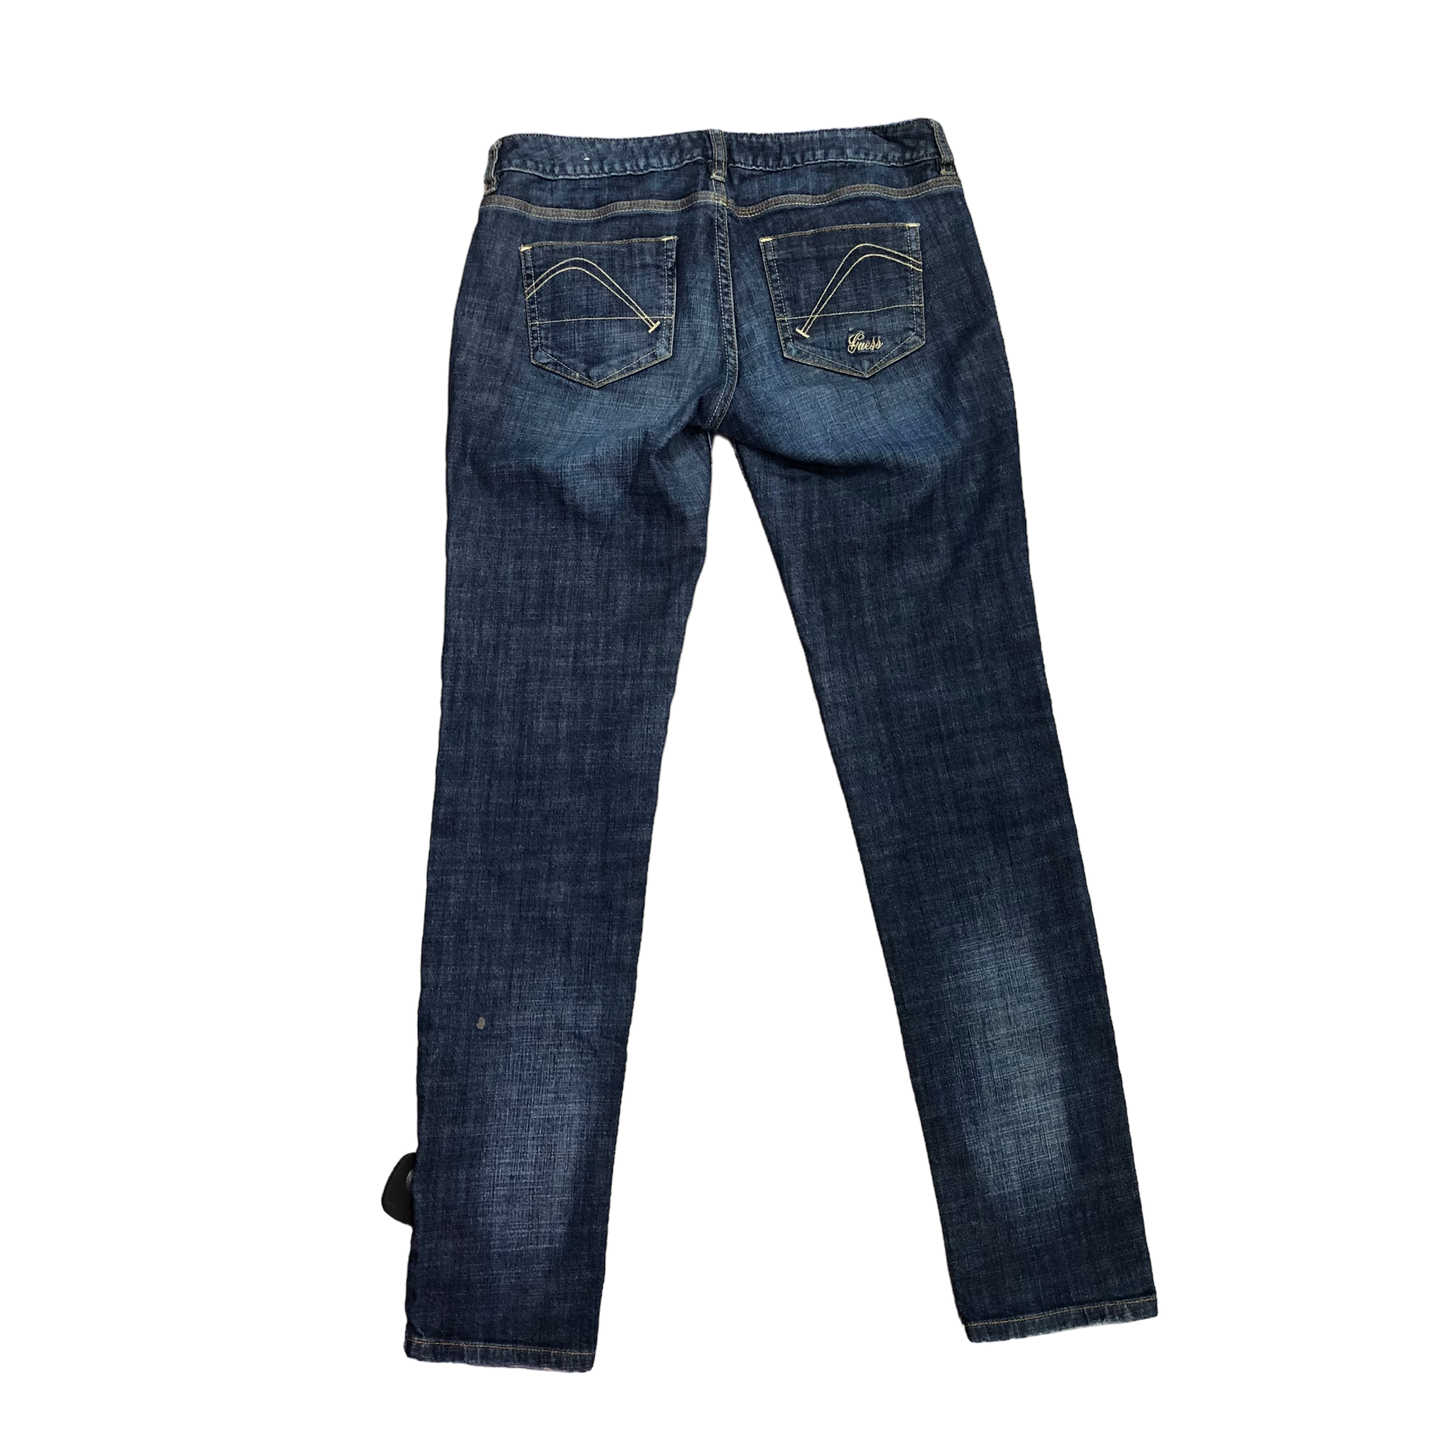 Jeans Skinny By Guess  Size: 8